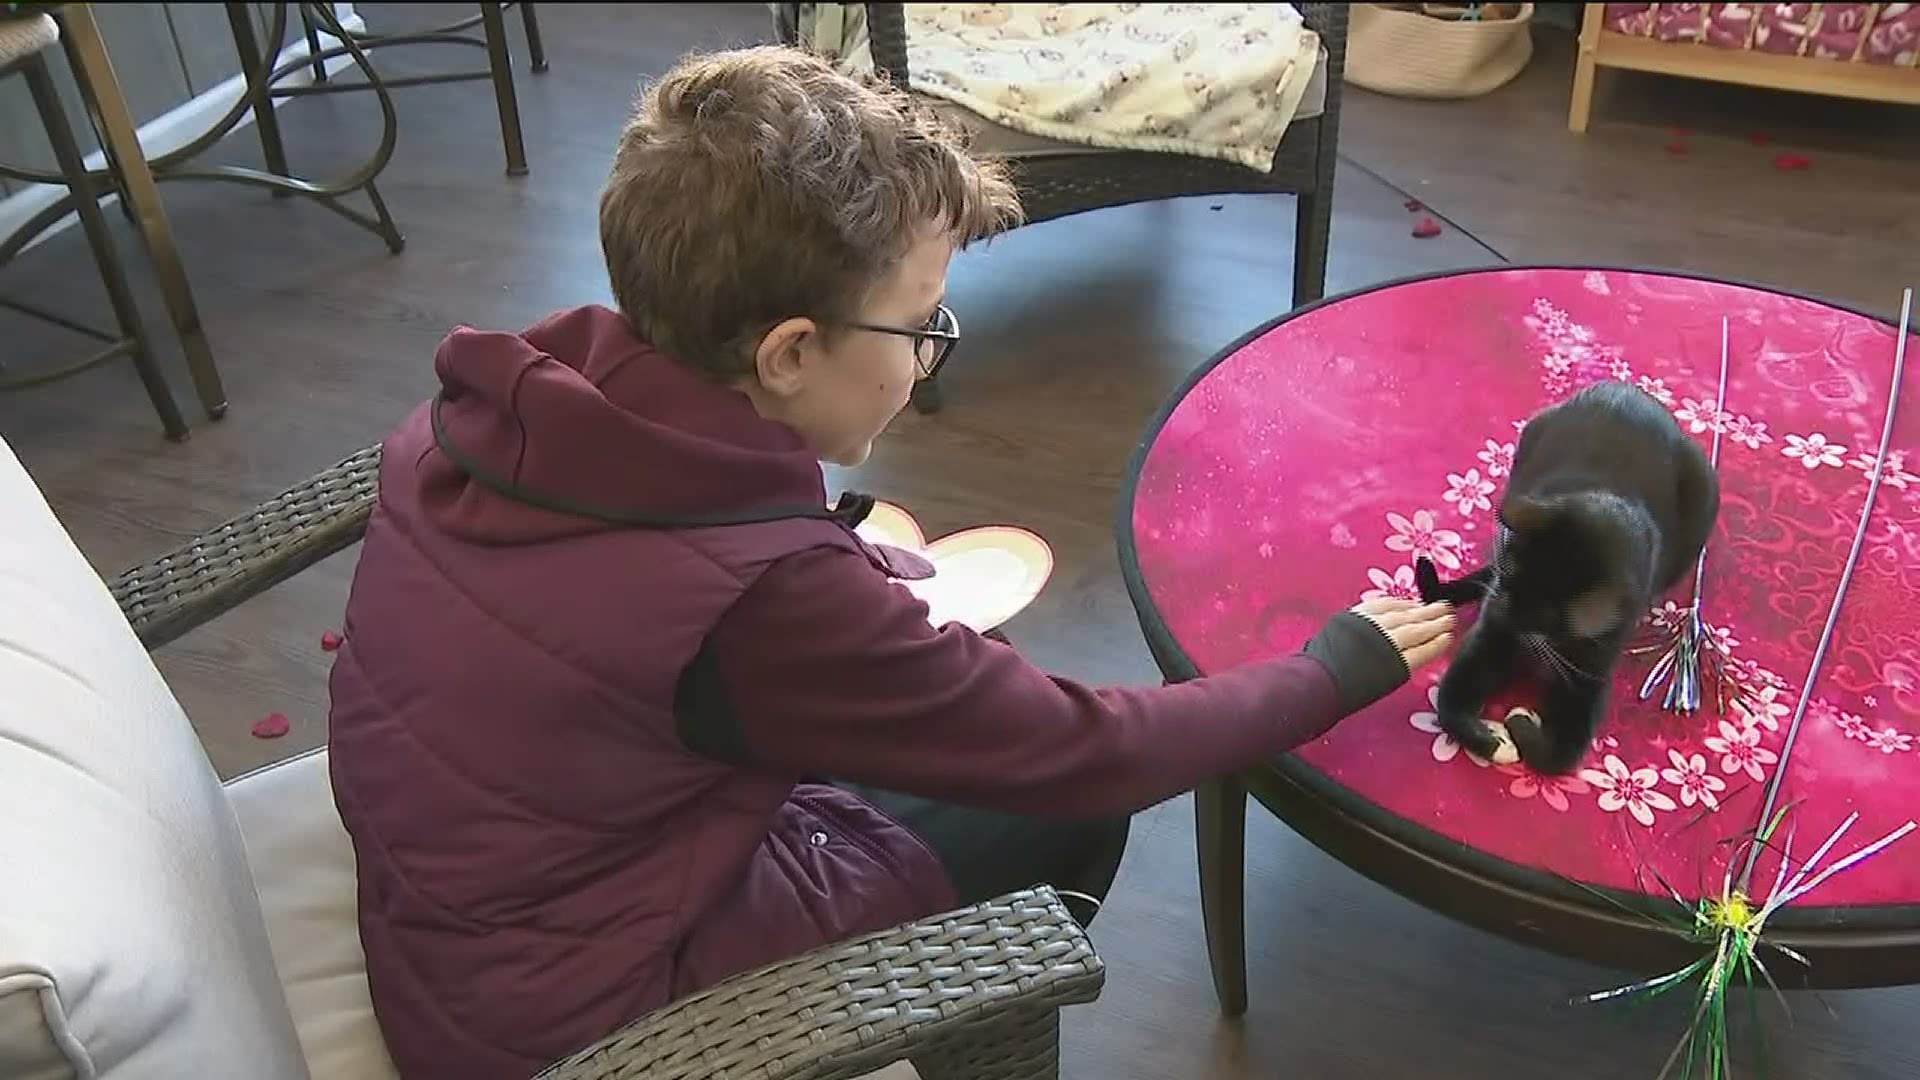 Instead of presents, he asked for donations to 'Cats in Bloom.'